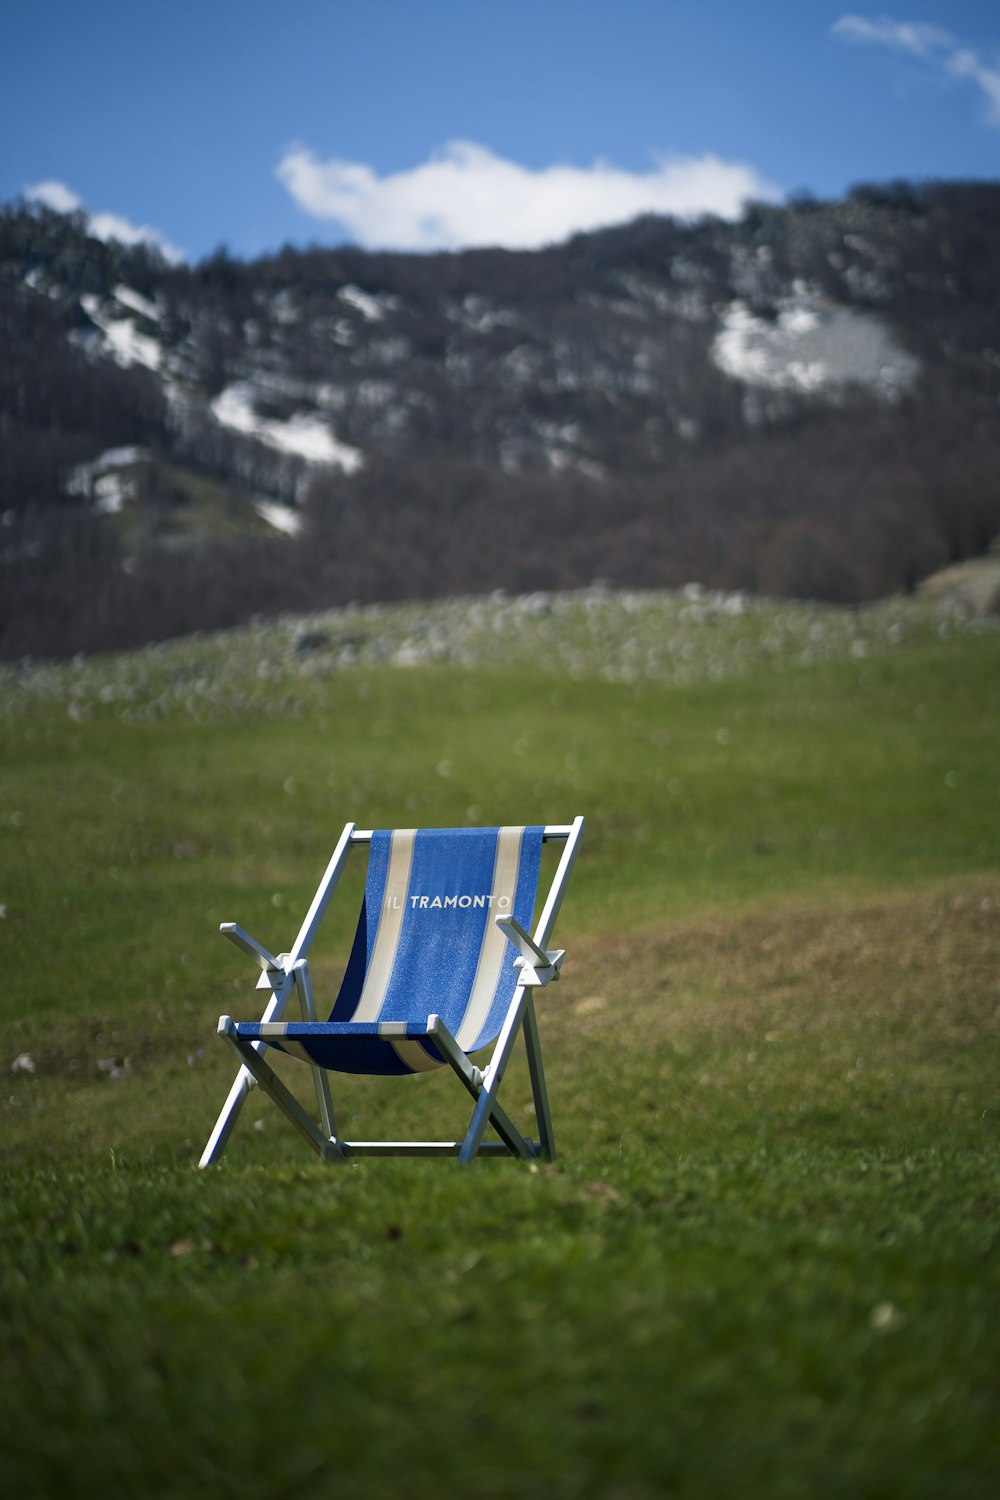 a chair in a grassy field